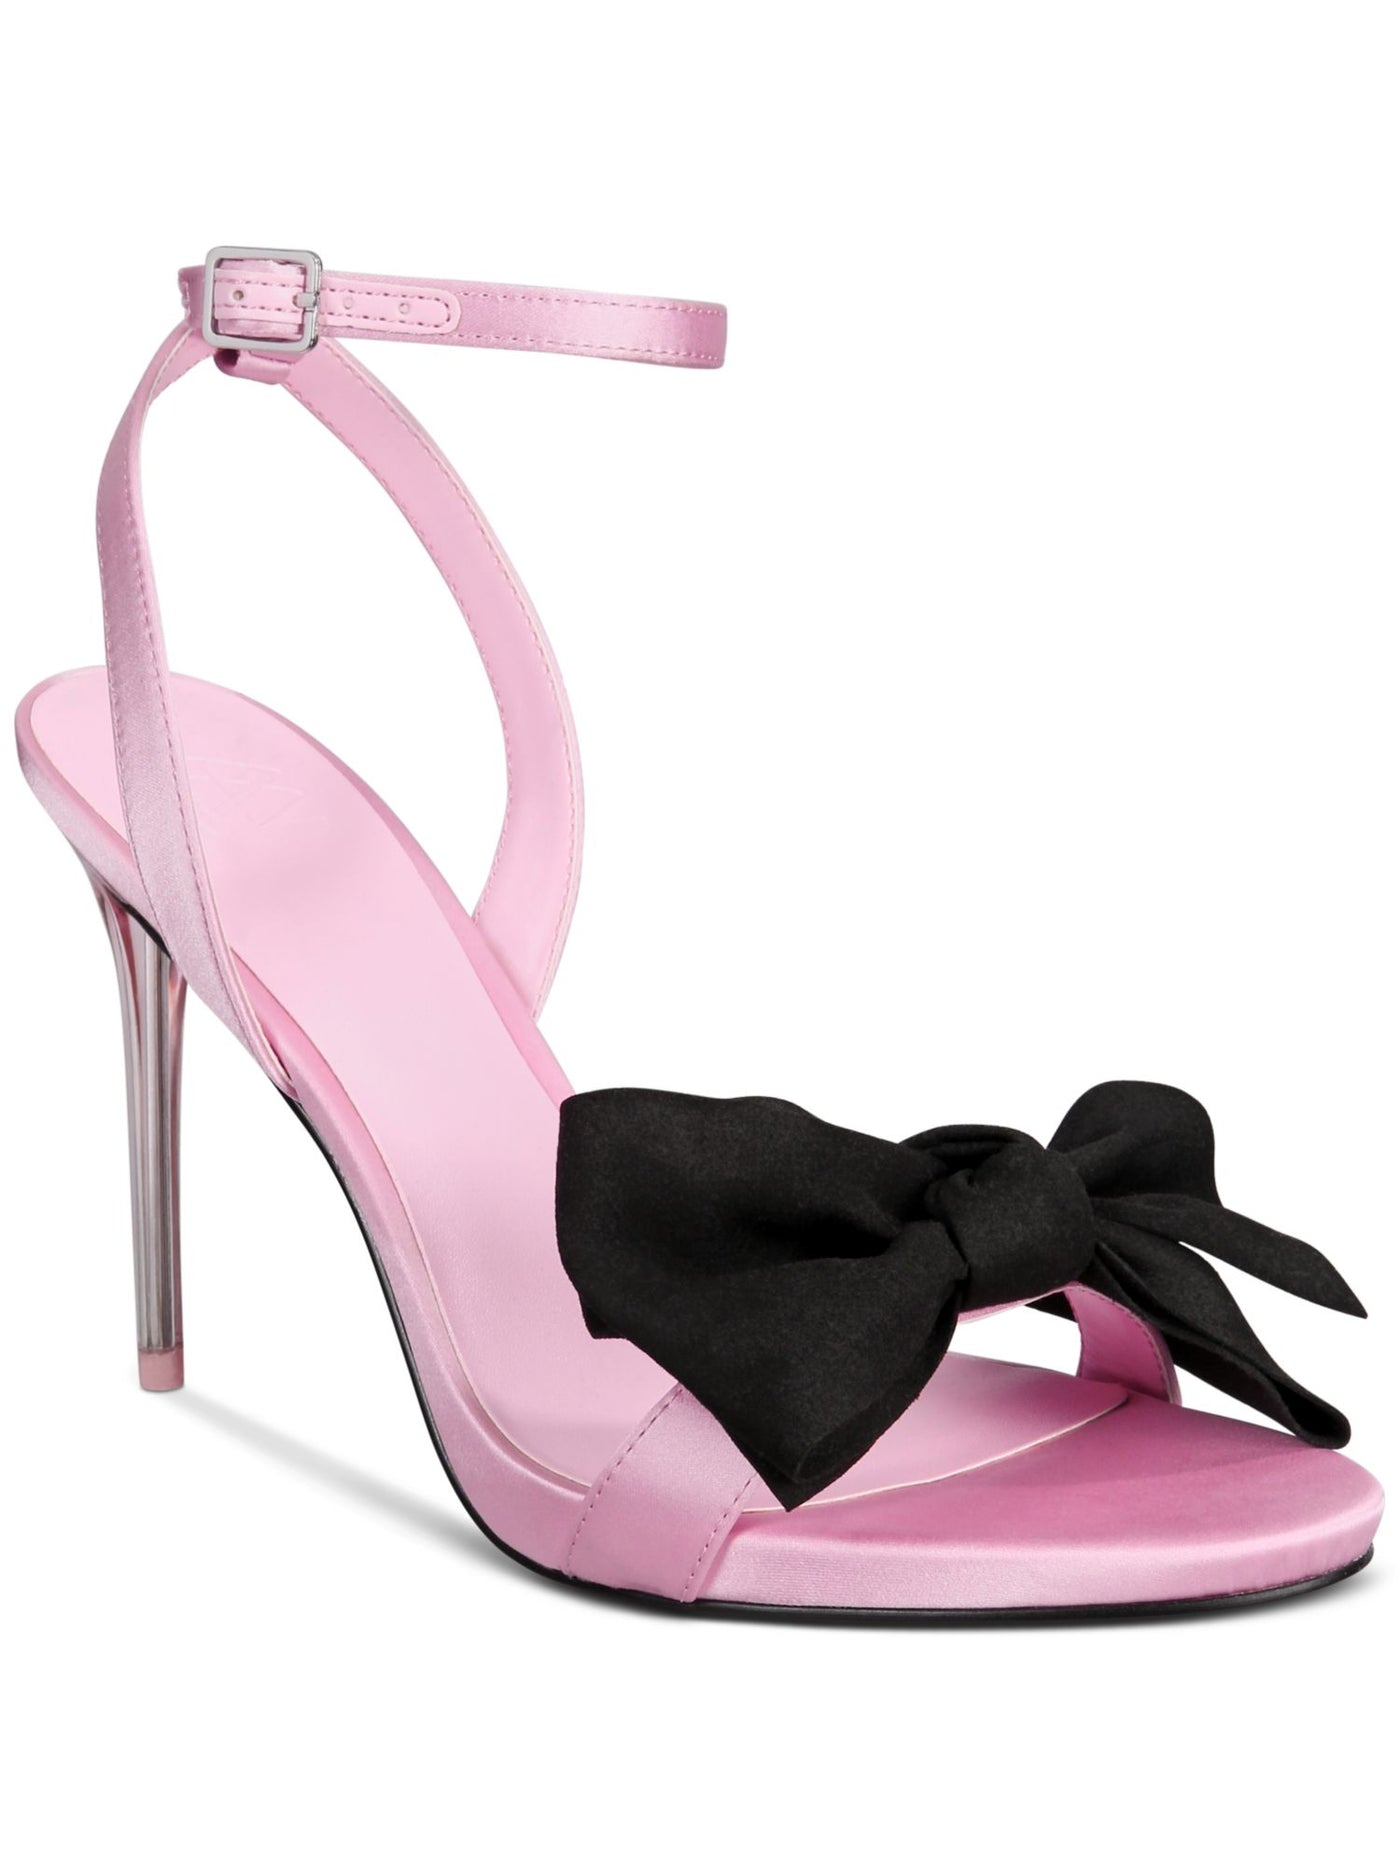 AAJ BY AMINAH Womens Pink Cushioned Bow Accent Ankle Strap Yahira Almond Toe Stiletto Buckle Dress Heeled Sandal 11 M